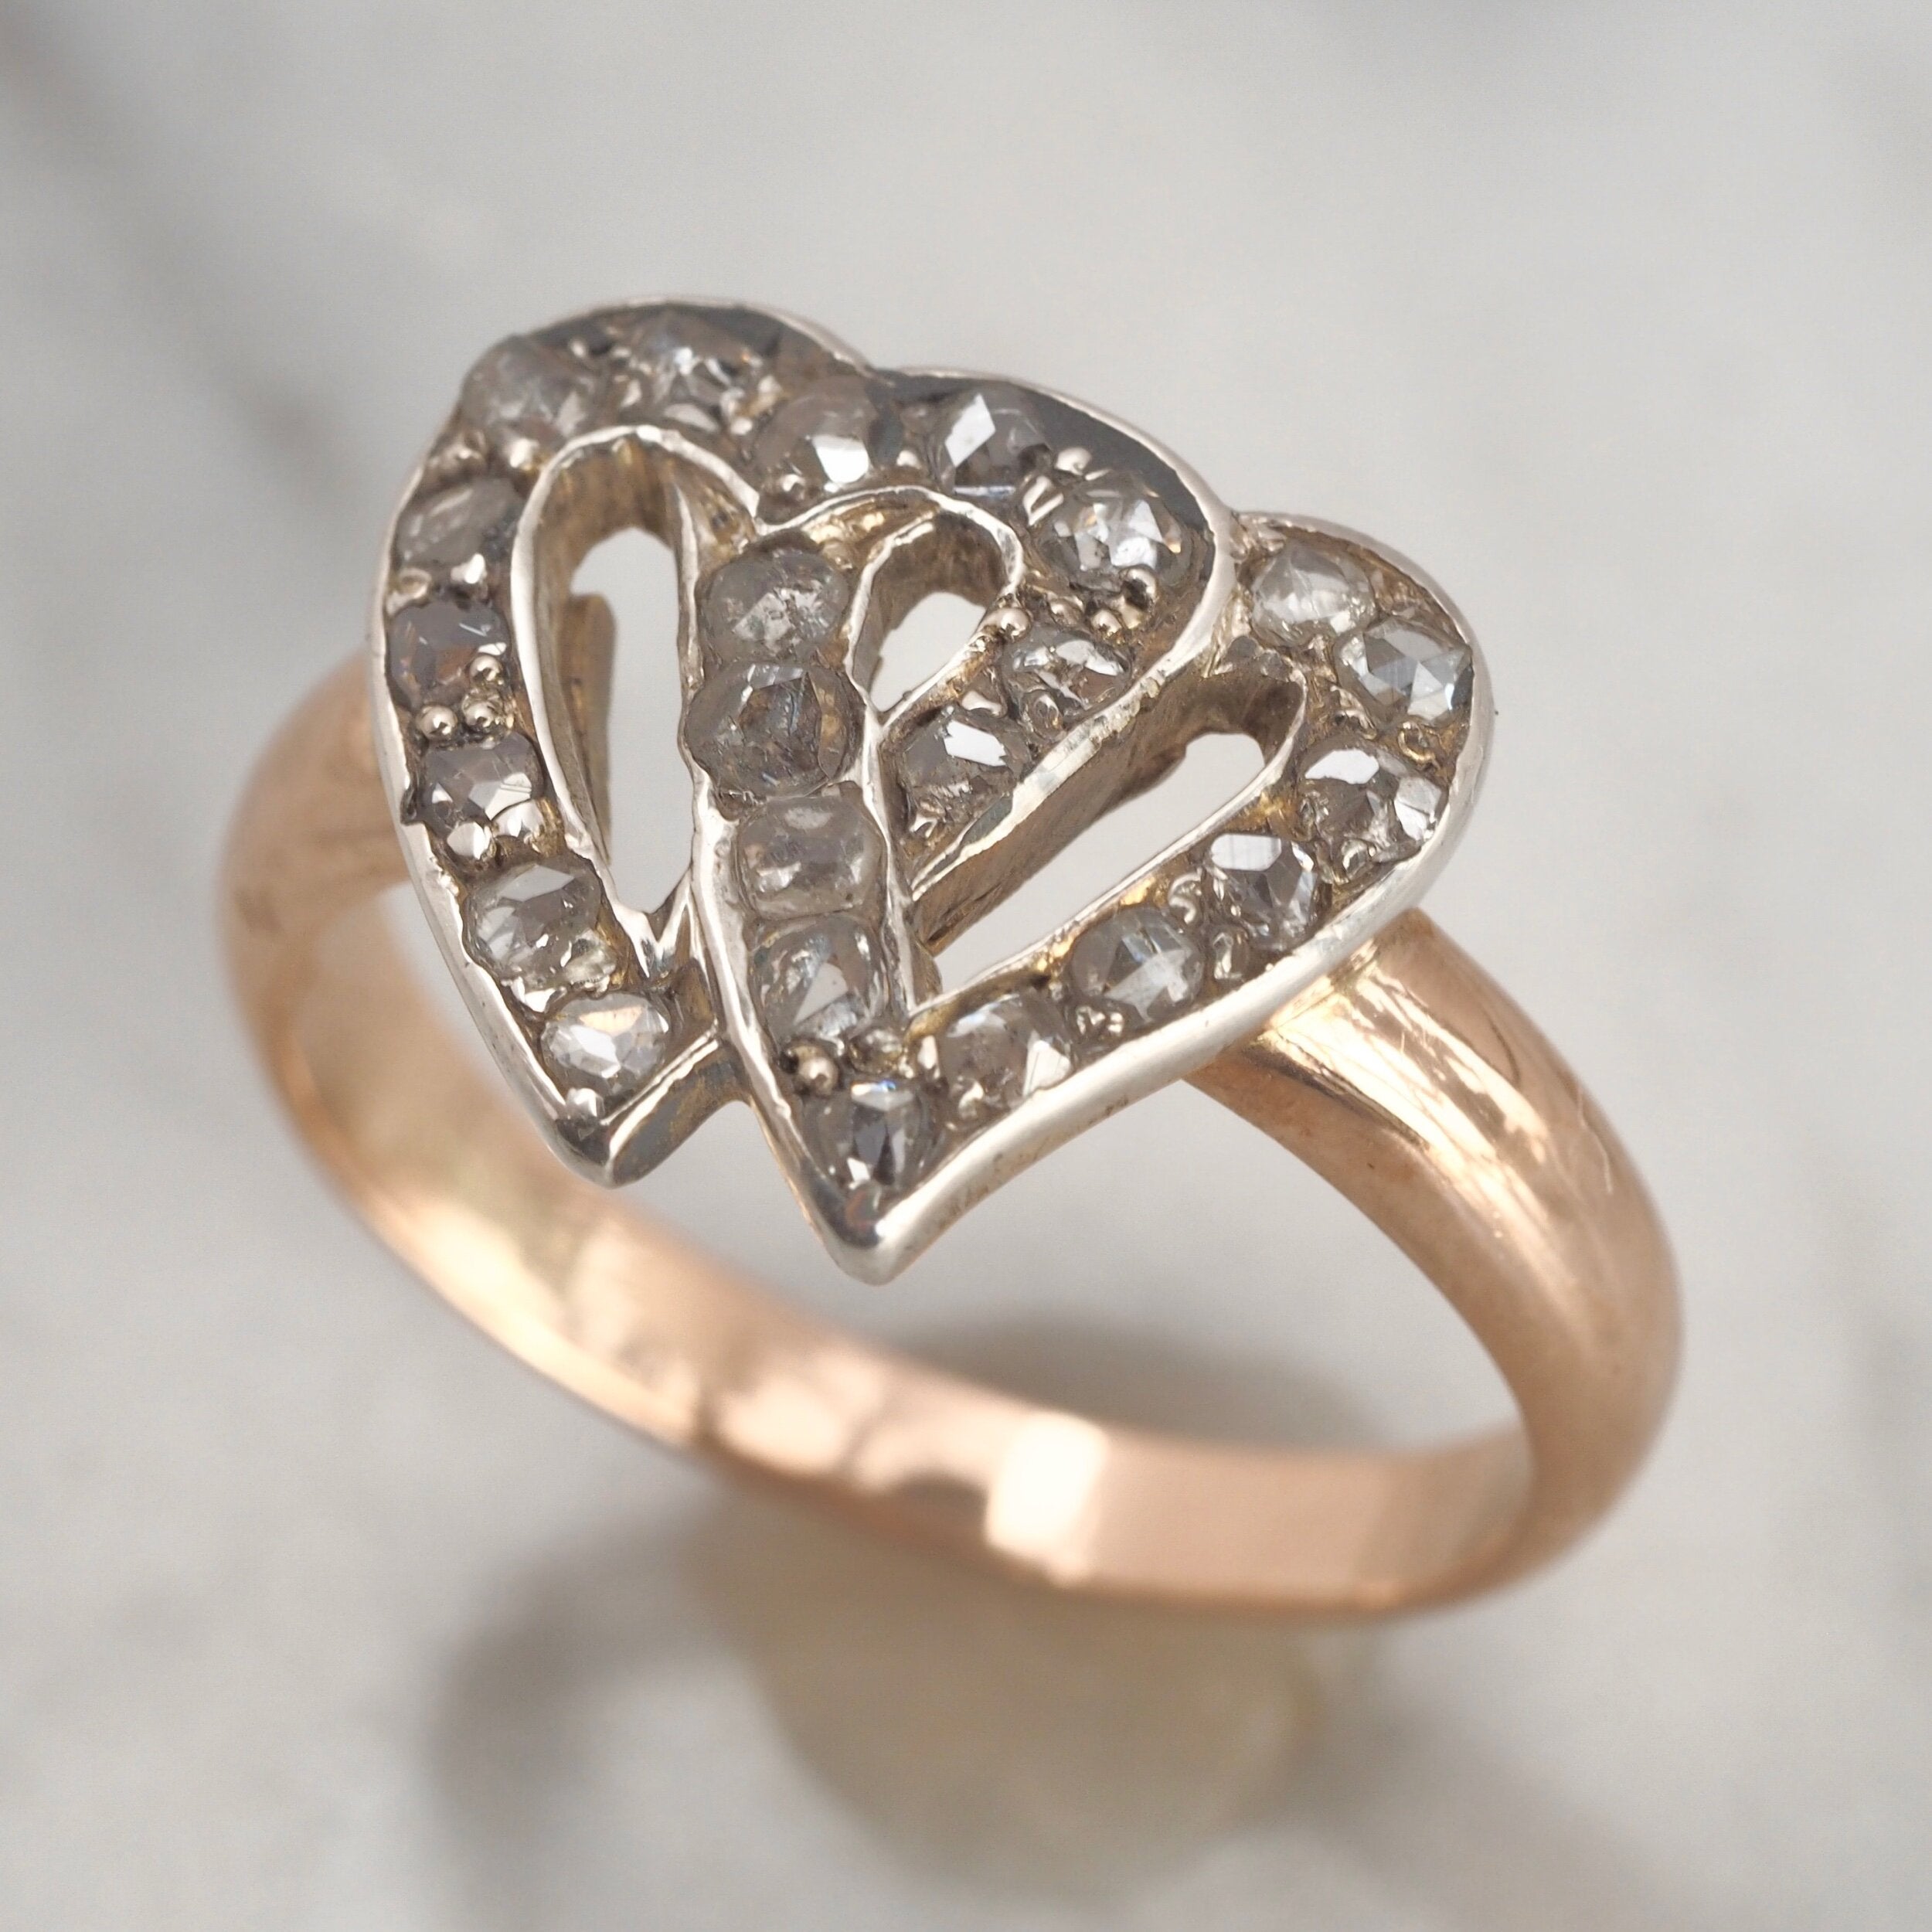 Antique Early Victorian 14k Gold Rose Cut Diamond Hearts Ring